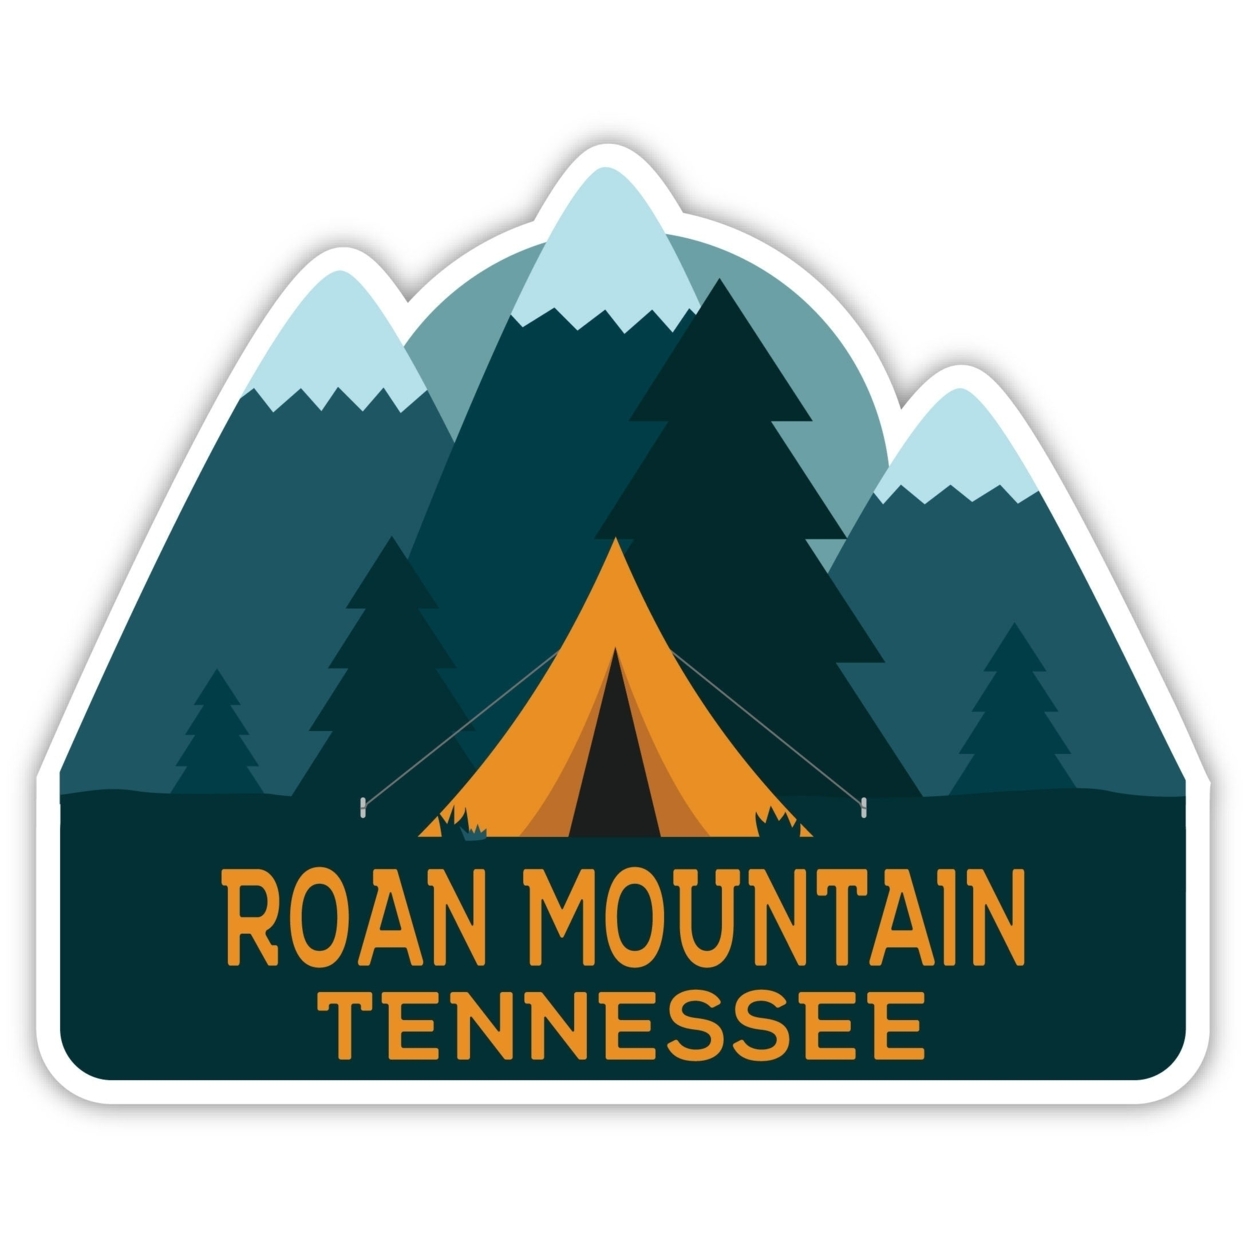 Roan Mountain Tennessee Souvenir Decorative Stickers (Choose Theme And Size) - Single Unit, 4-Inch, Tent